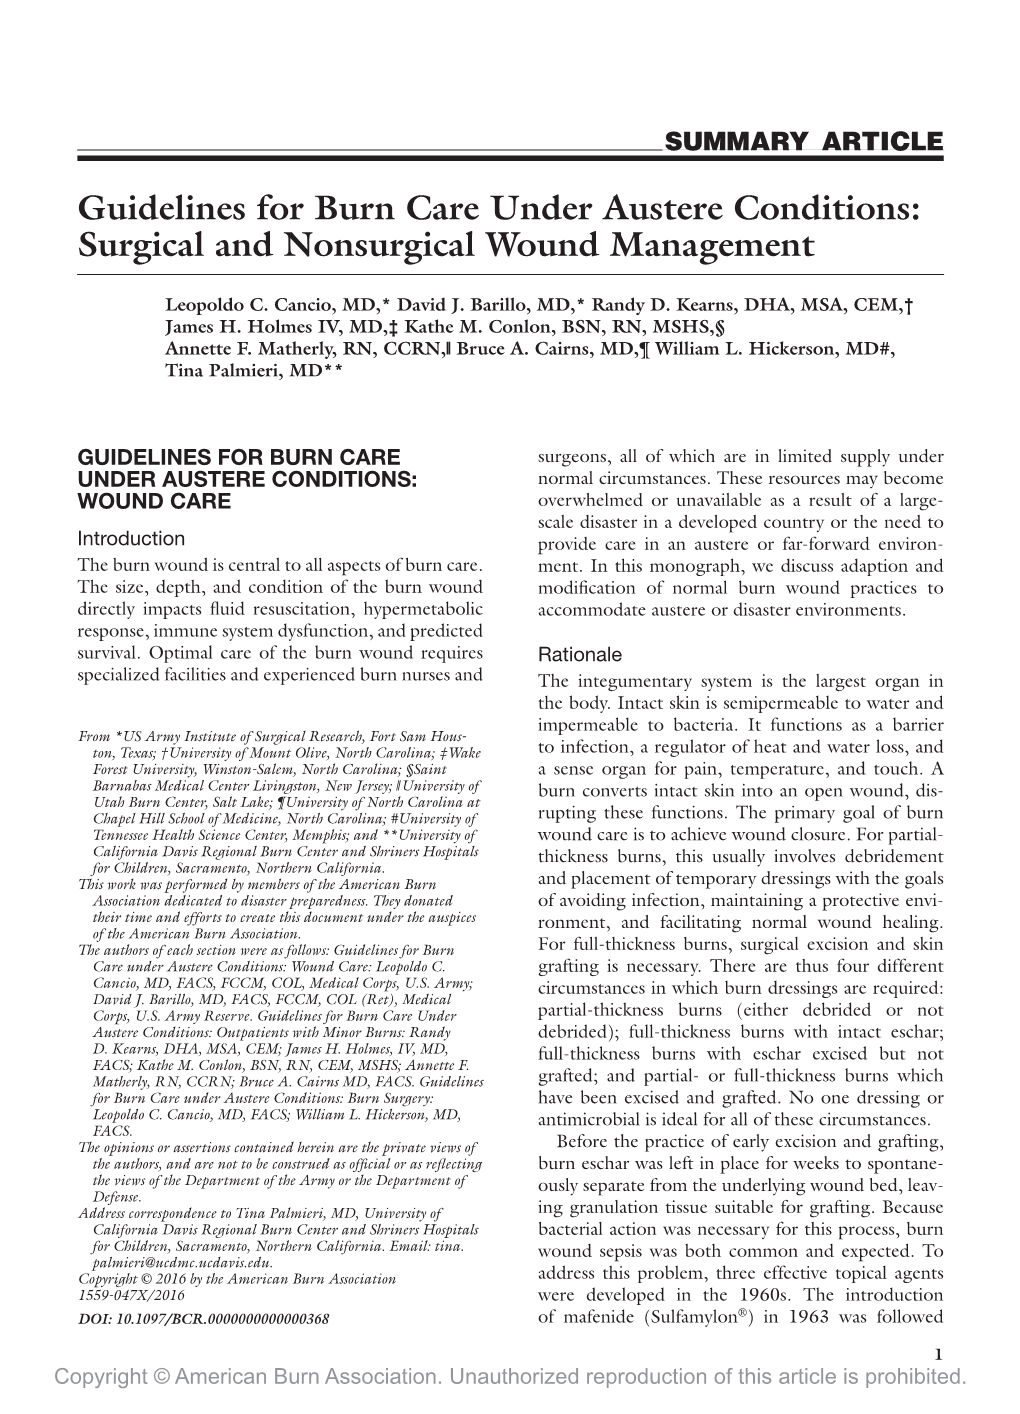 Guidelines for Burn Care Under Austere Conditions: Surgical and Nonsurgical Wound Management